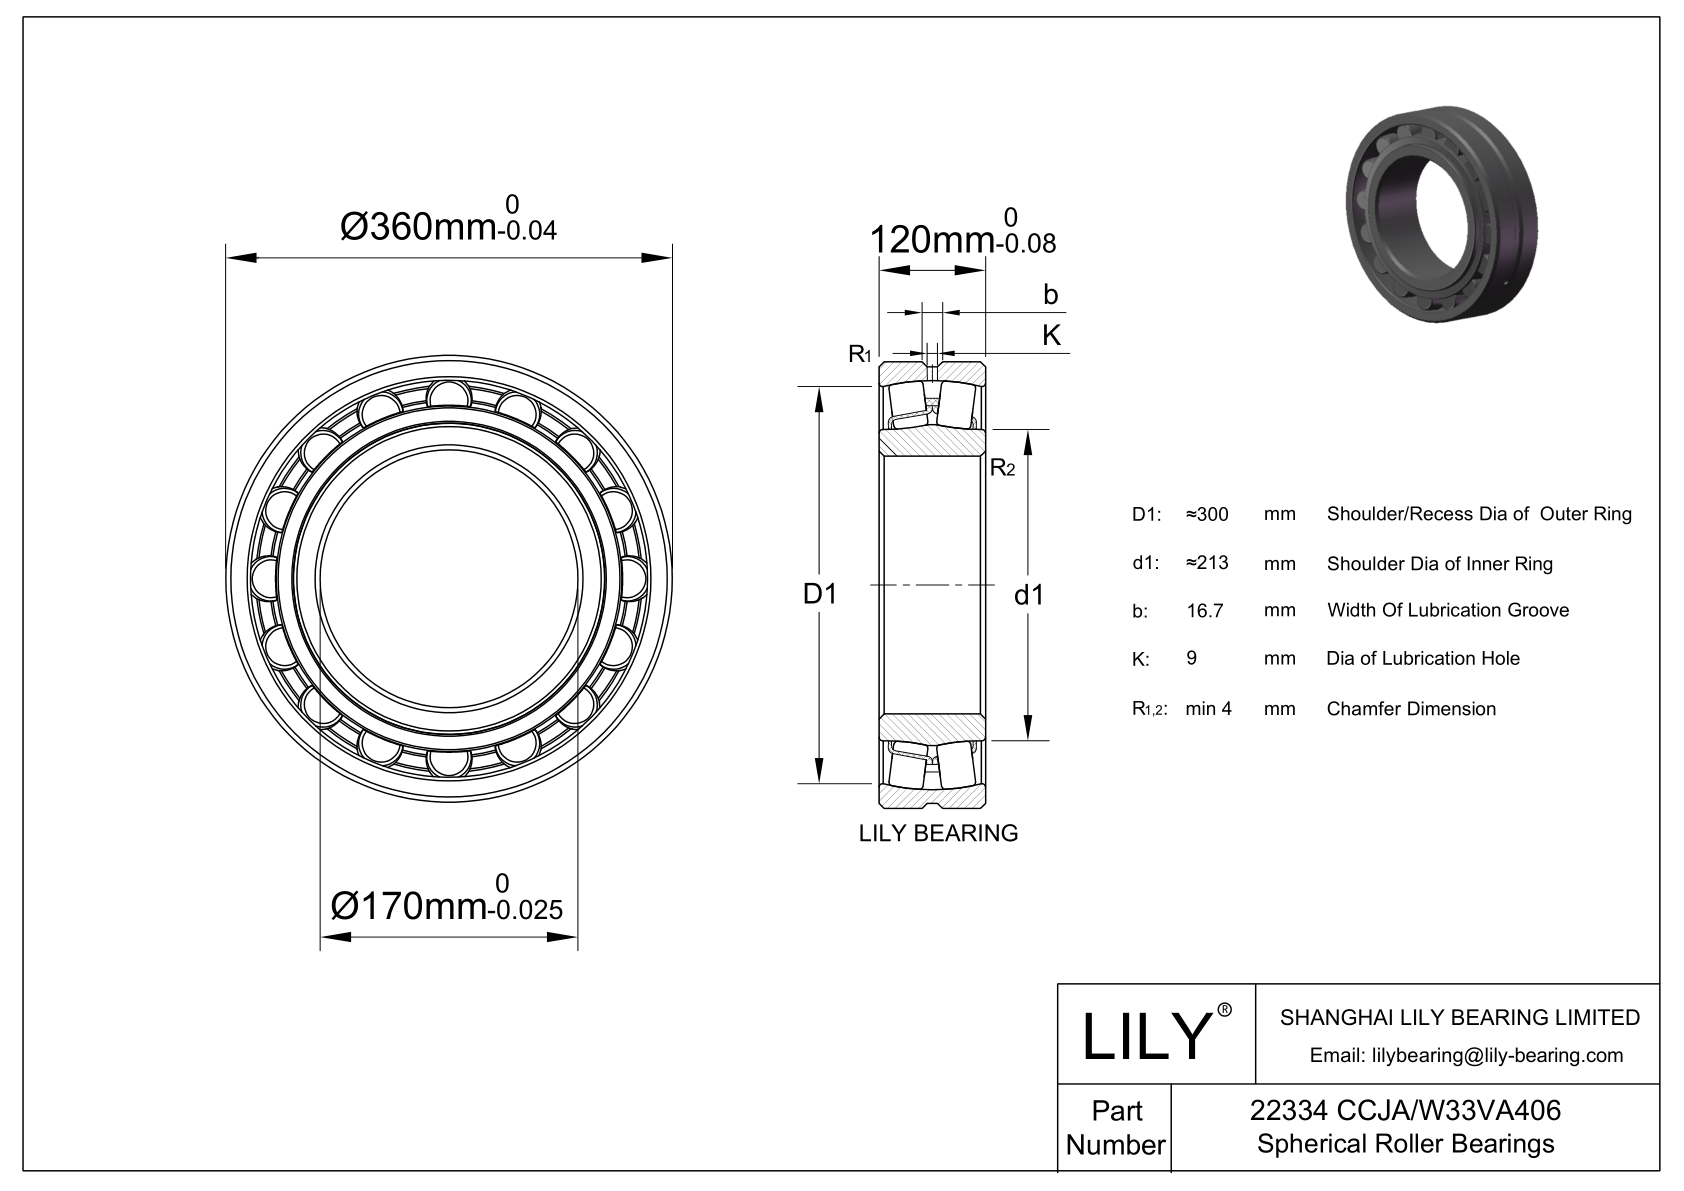 22334 CCJA/W33VA406 Double Row Spherical Roller Bearing cad drawing